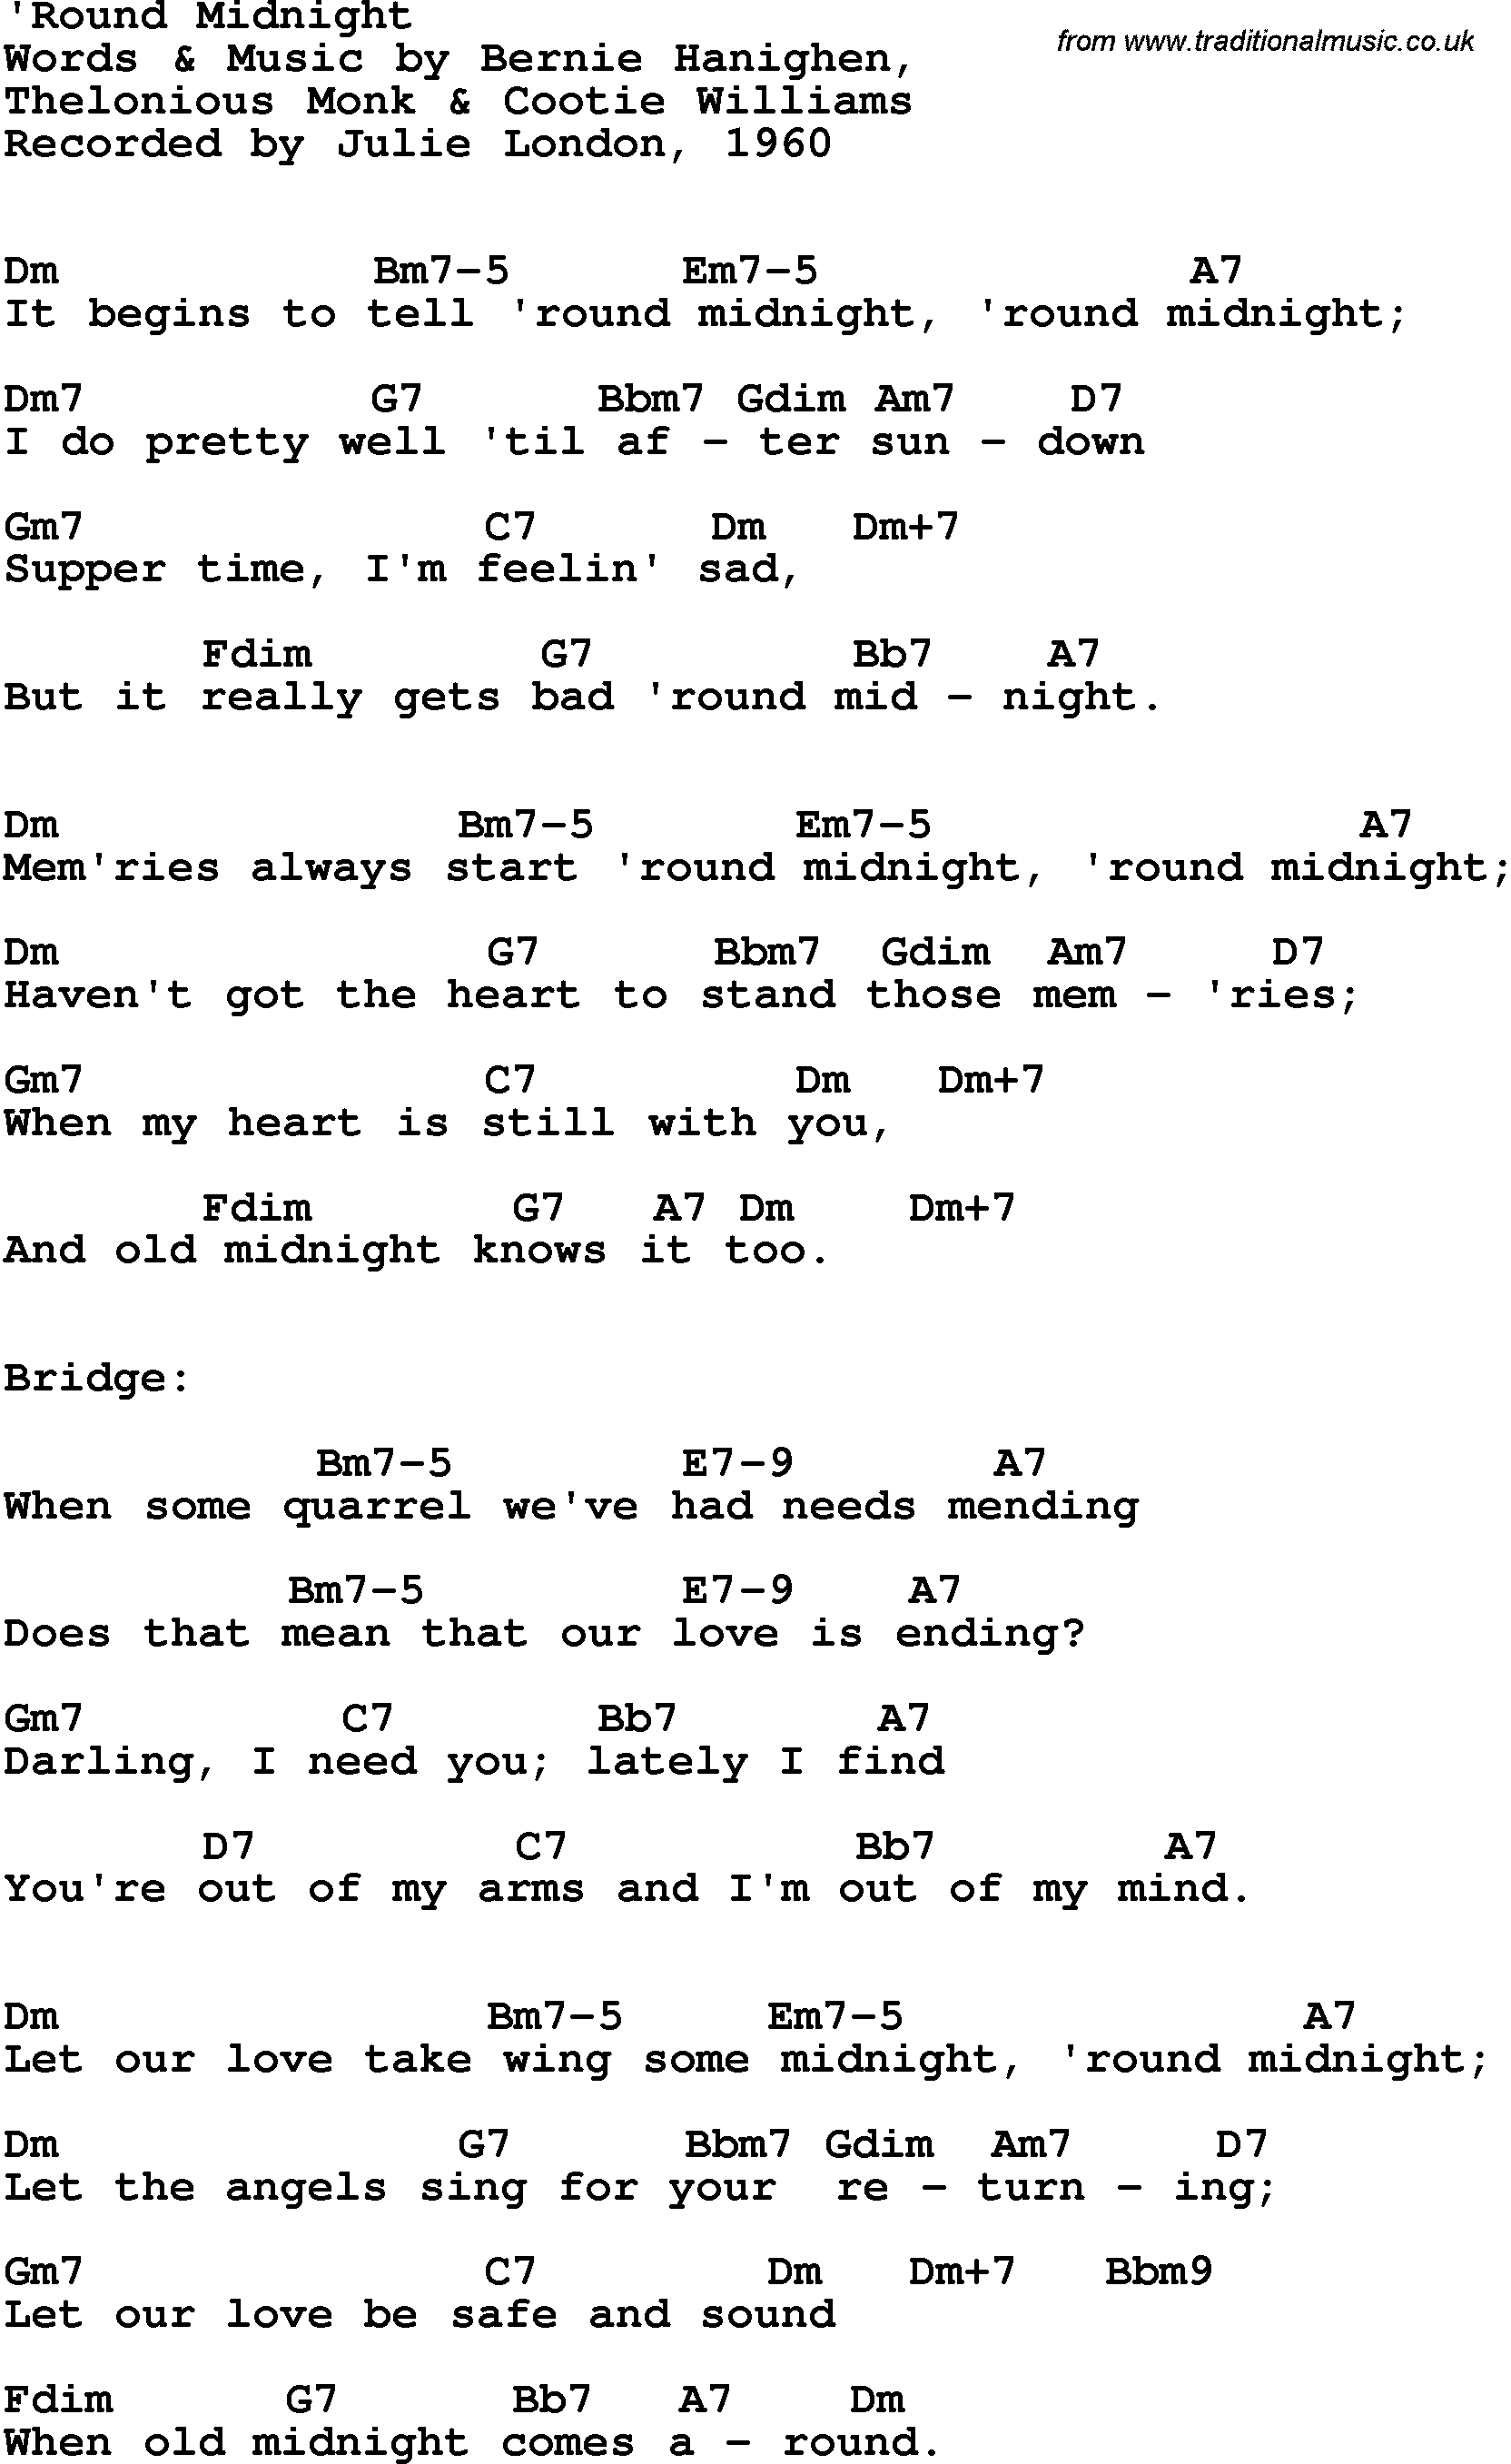 Song Lyrics with guitar chords for 'Round Midnight - Julie London, 1960